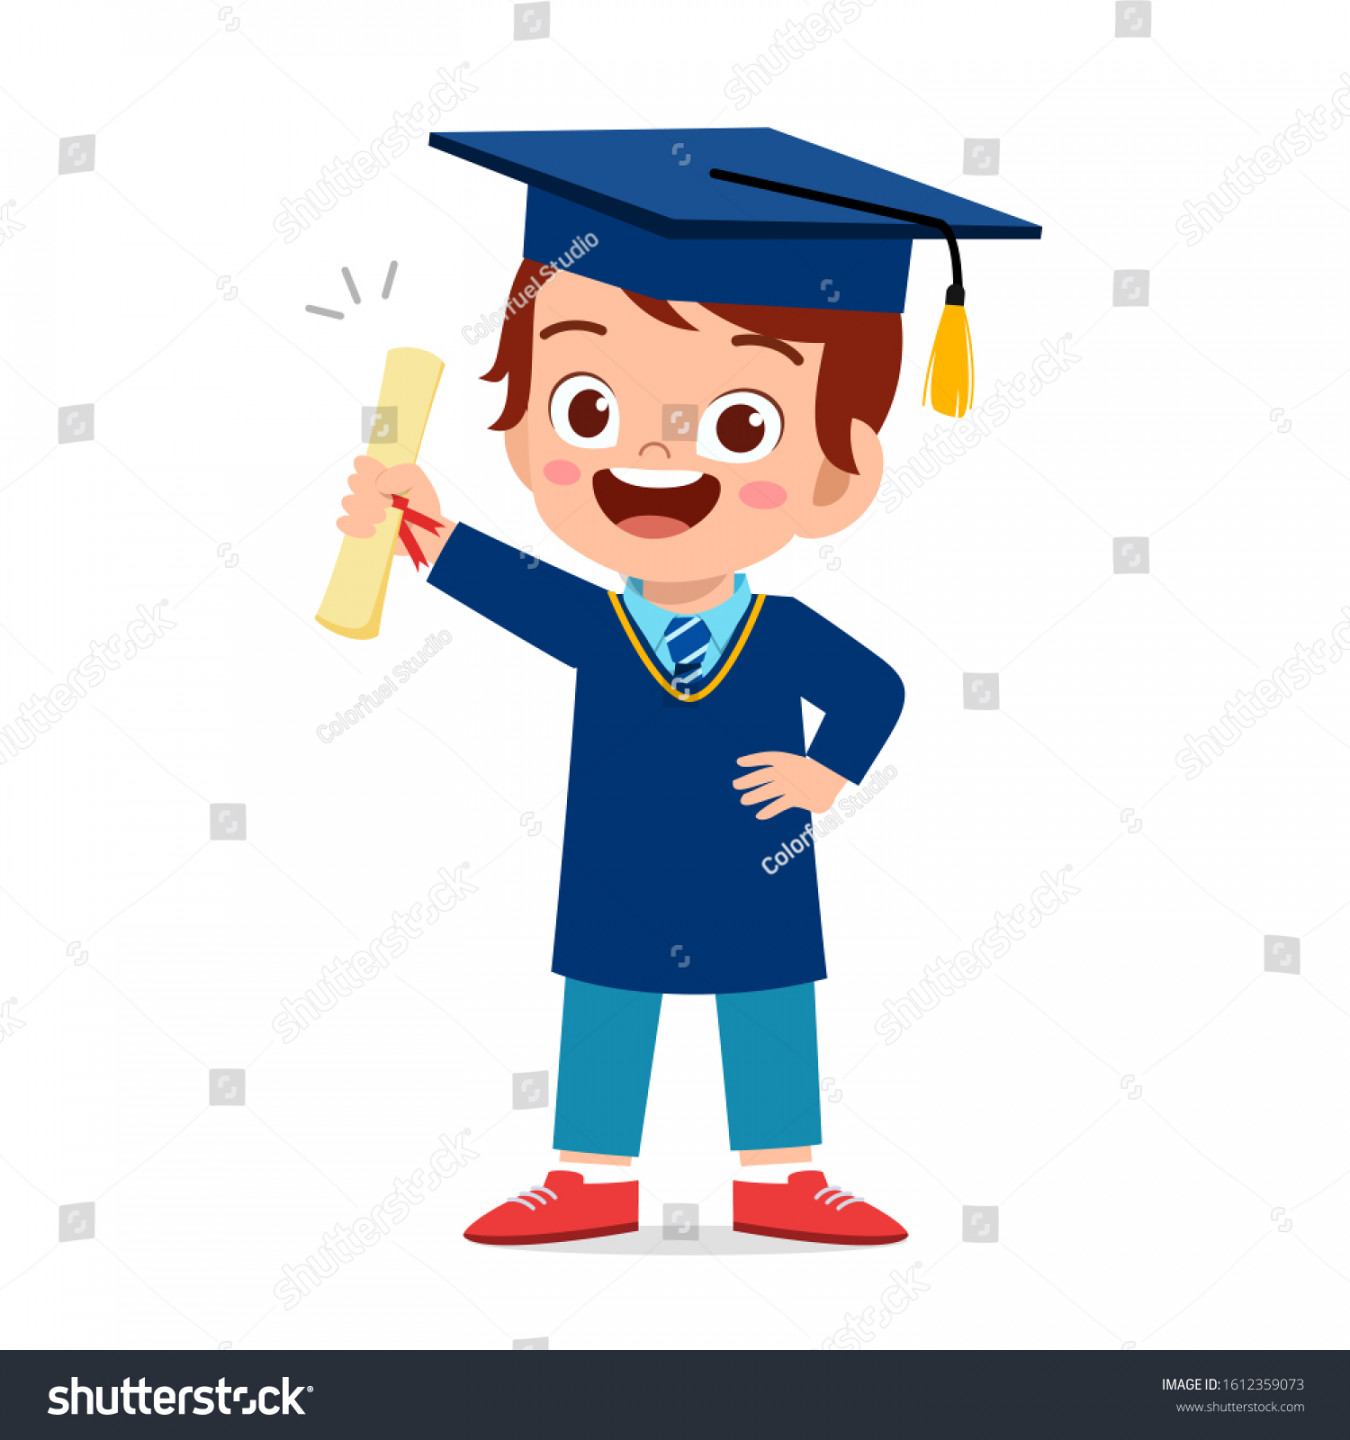 Kids Graduation Clipart Photos, Images and Pictures